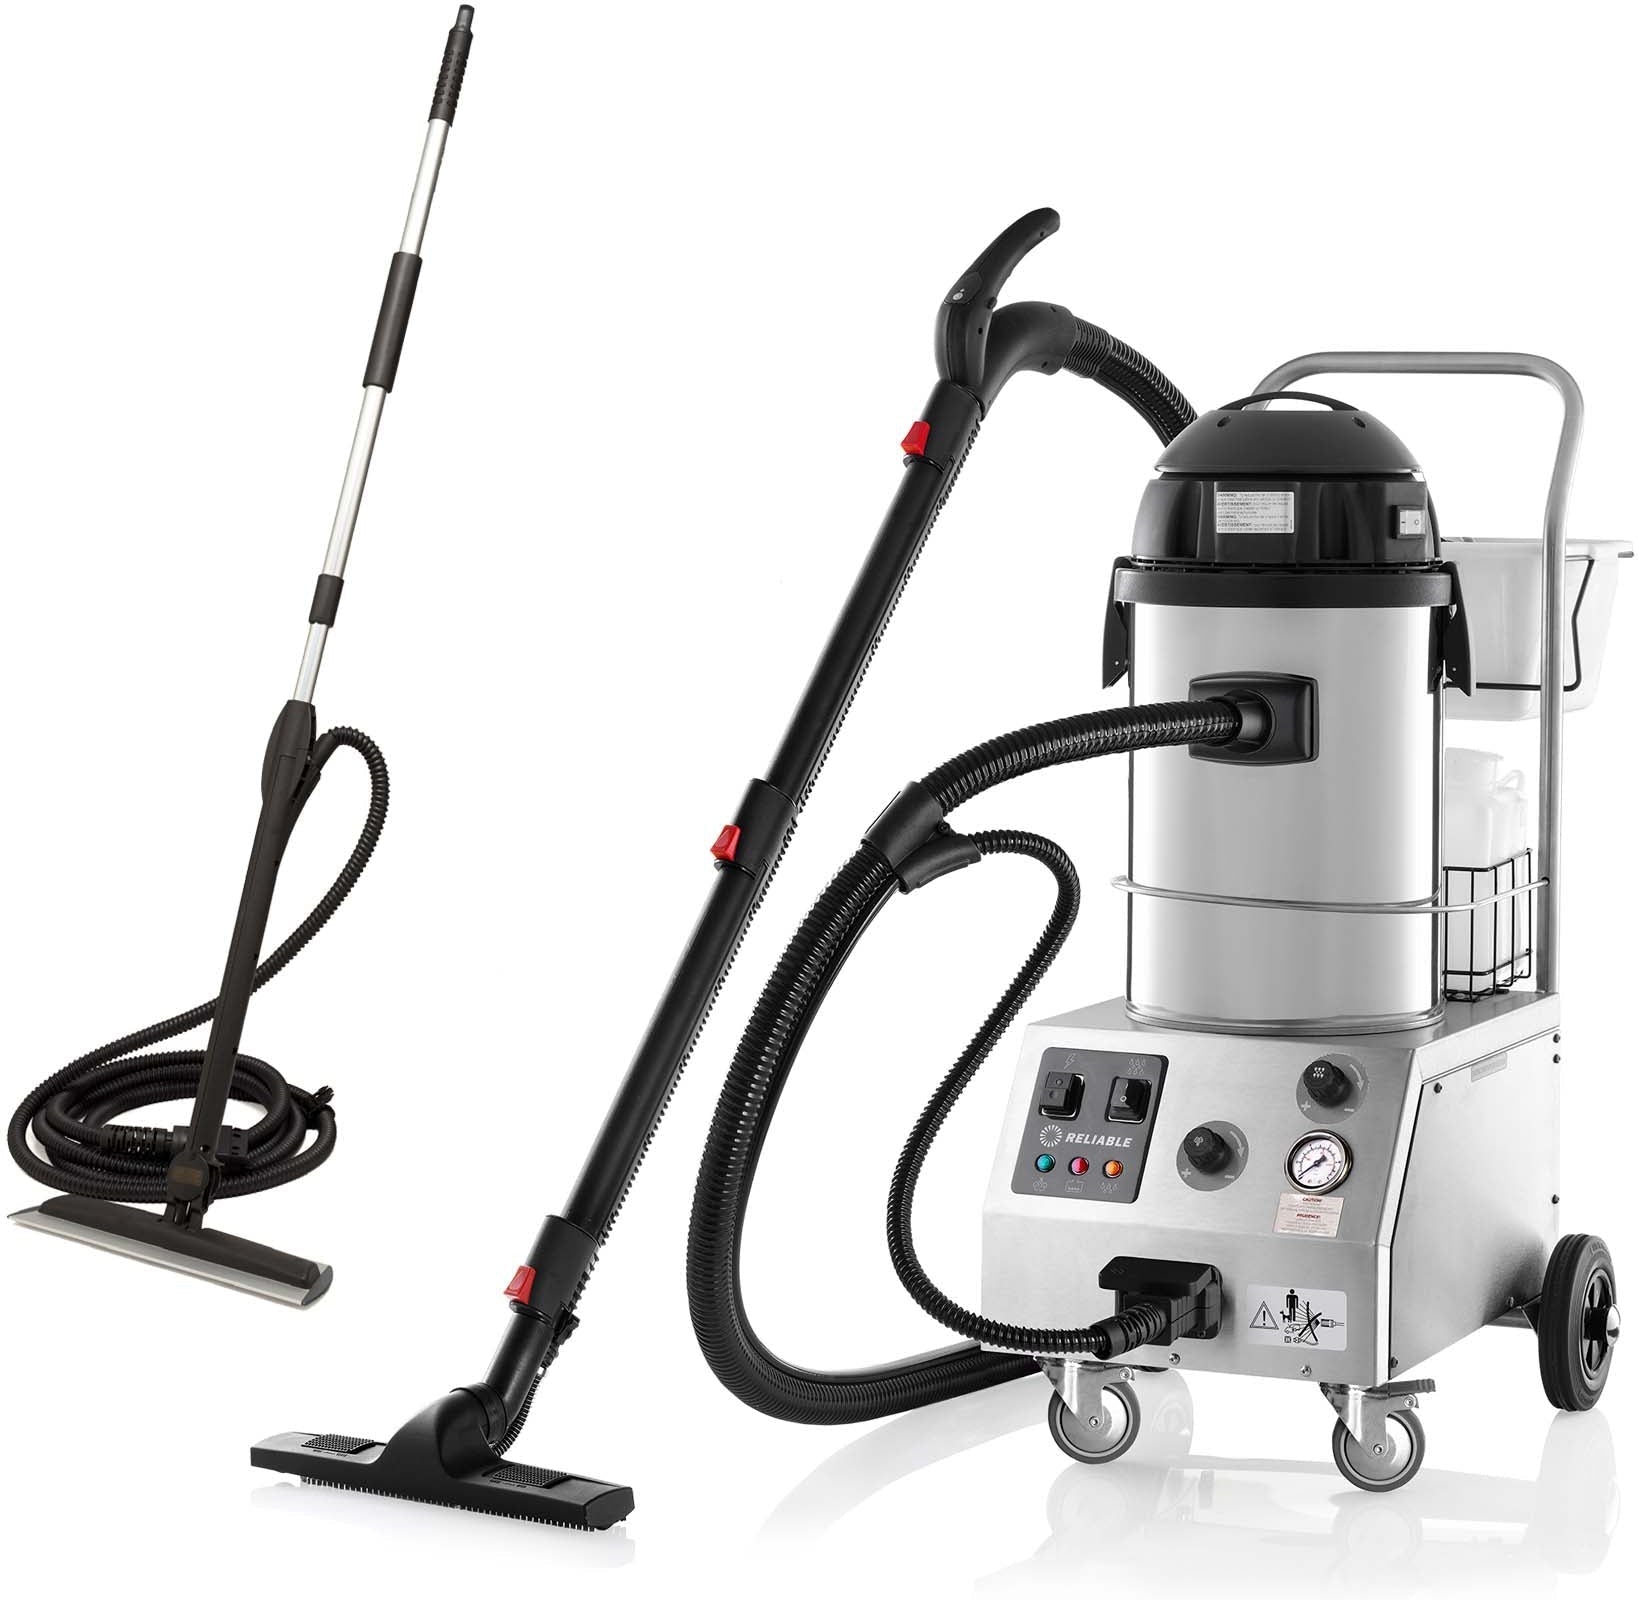 Reliable - Tandem Pro Commercial Steam Cleaning System With Mop - 2000CV/2000CVMOP